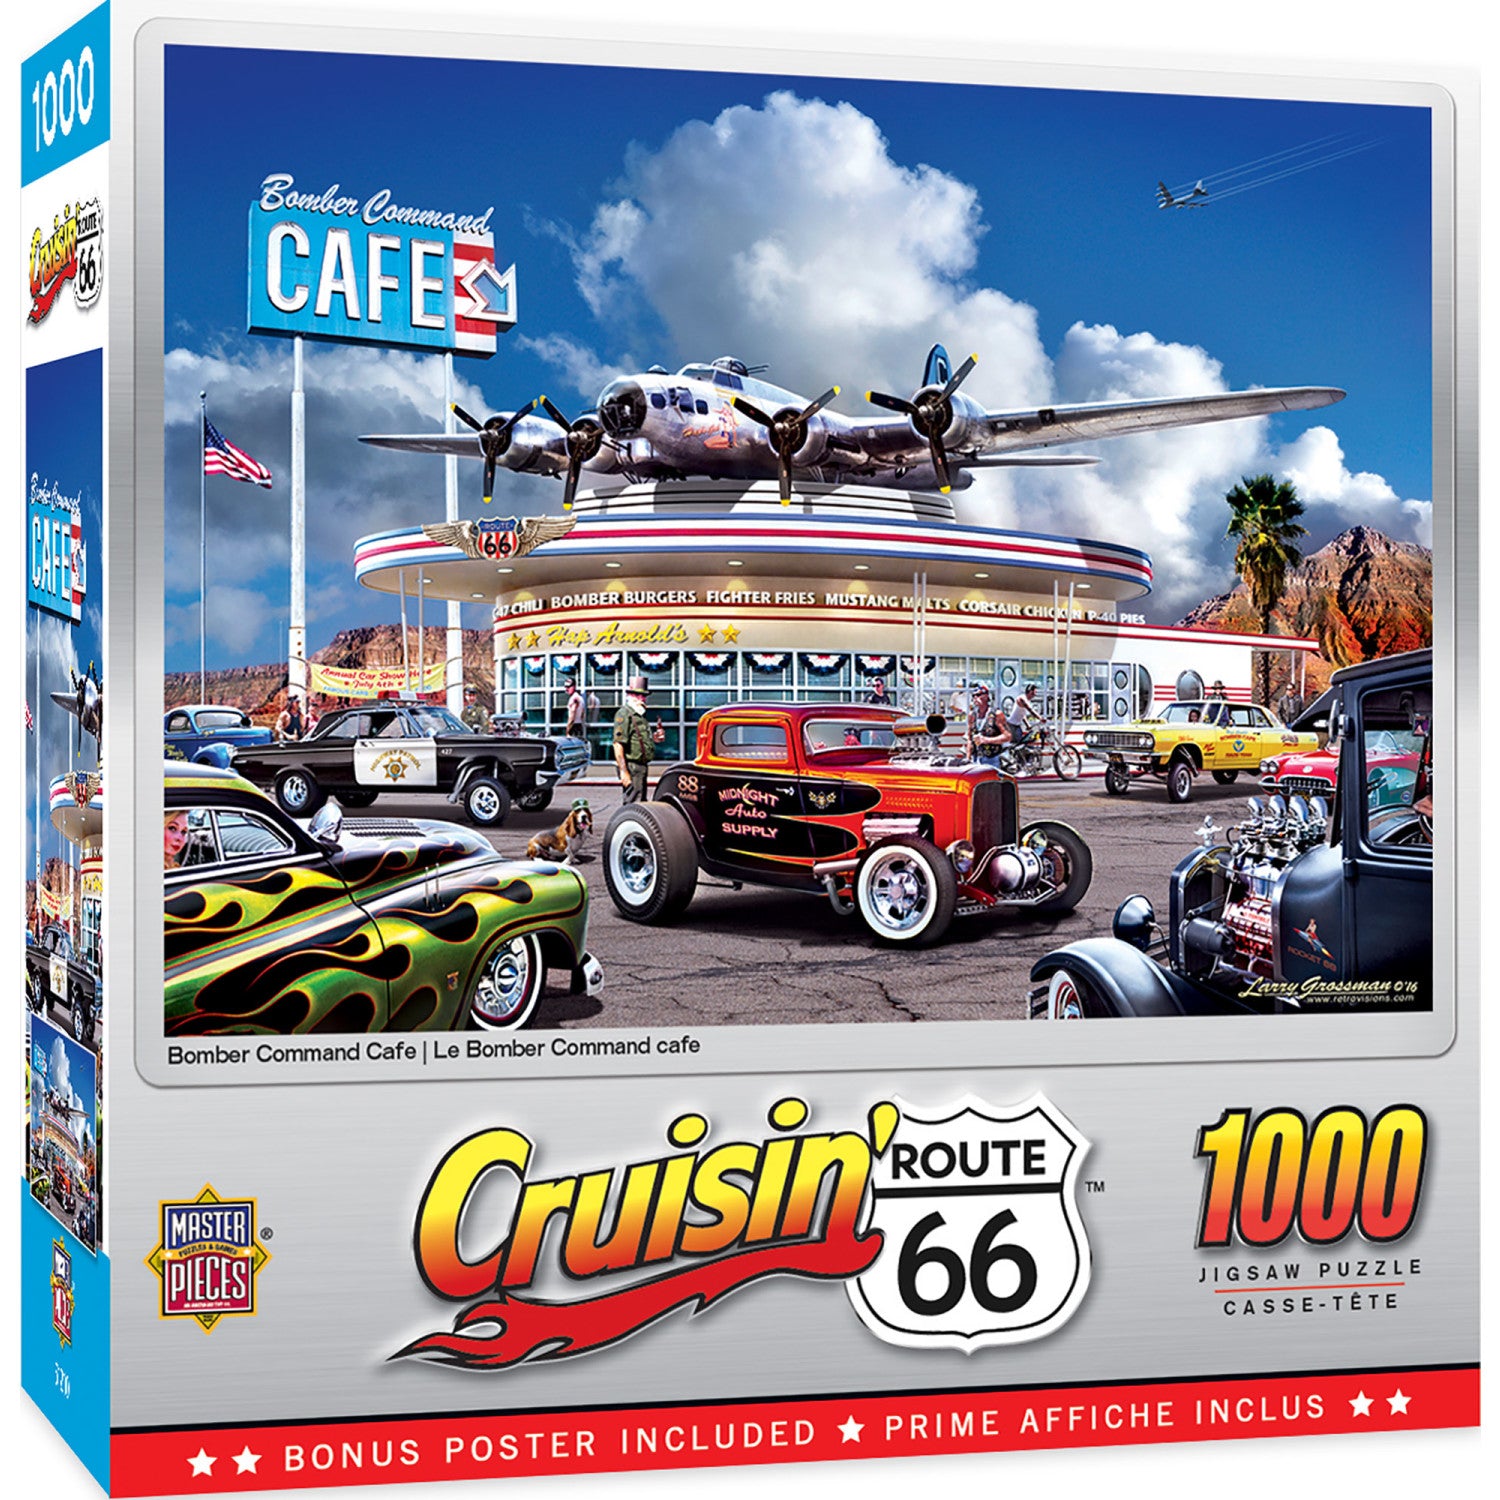 Cruisin' Route 66 - Bomber Command Cafe 1000 Piece Puzzle